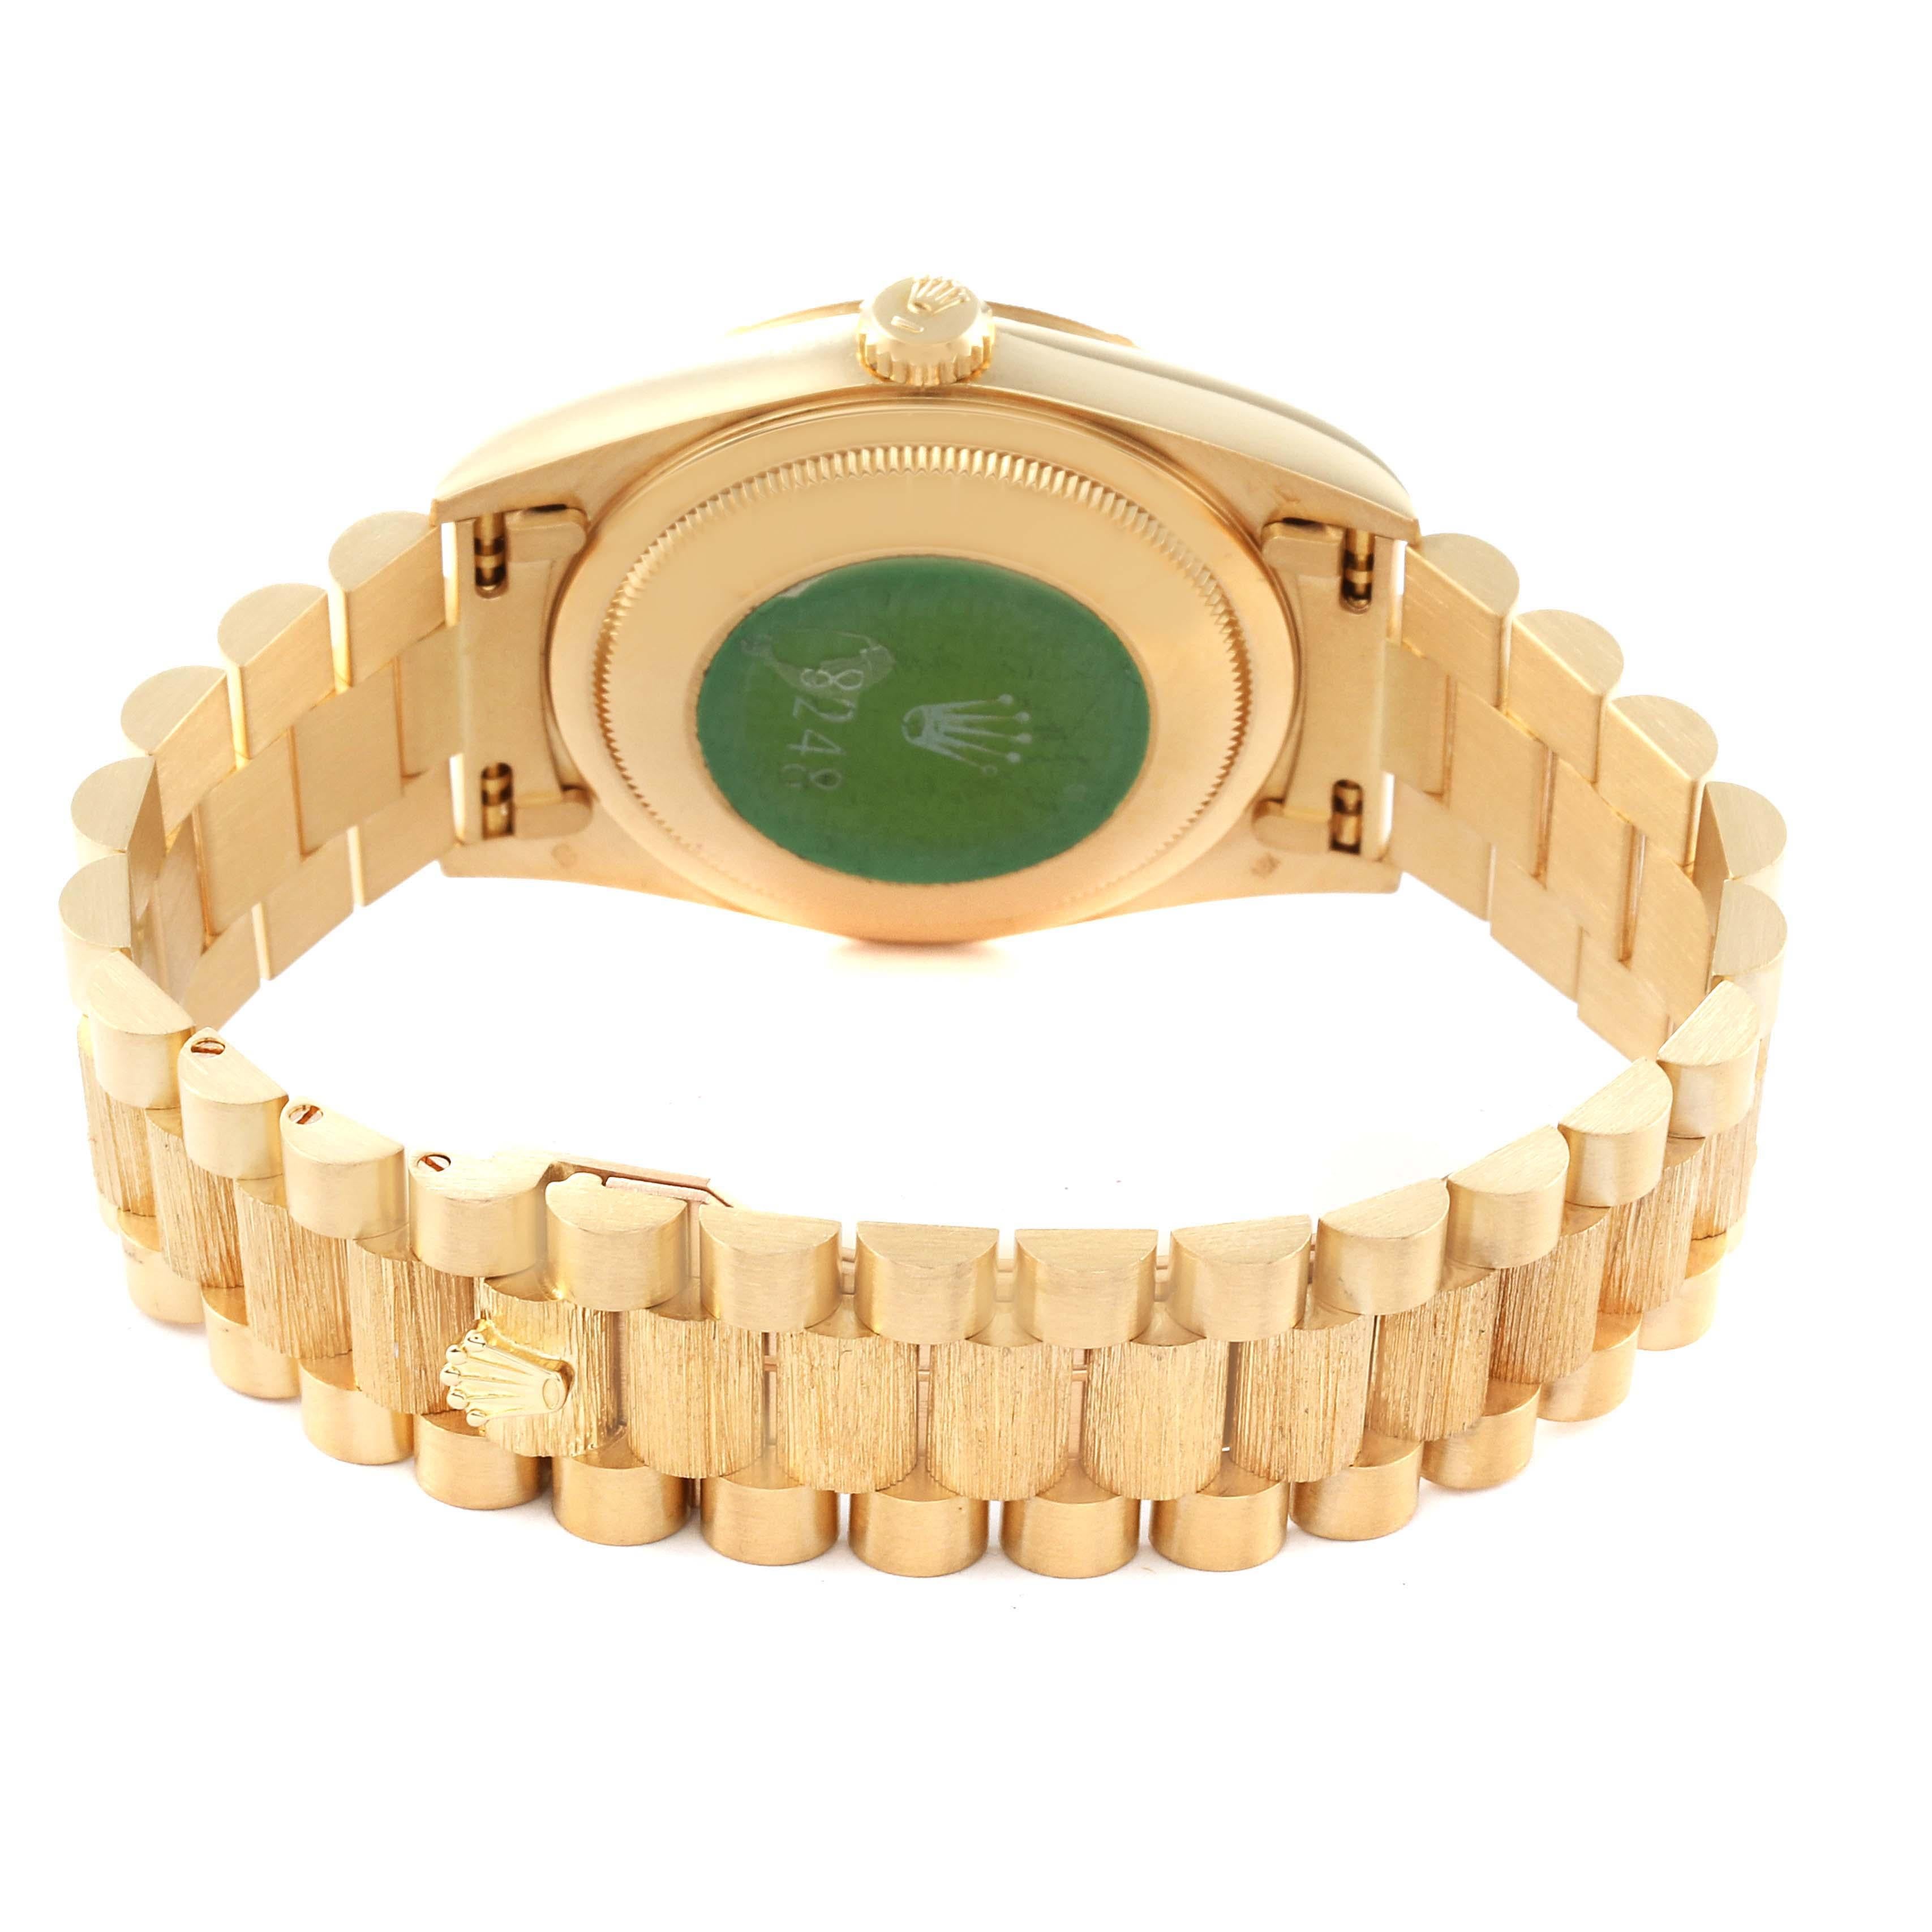 Rolex Day-Date President Yellow Gold Bark Finish Mens Watch 18248 For Sale 5